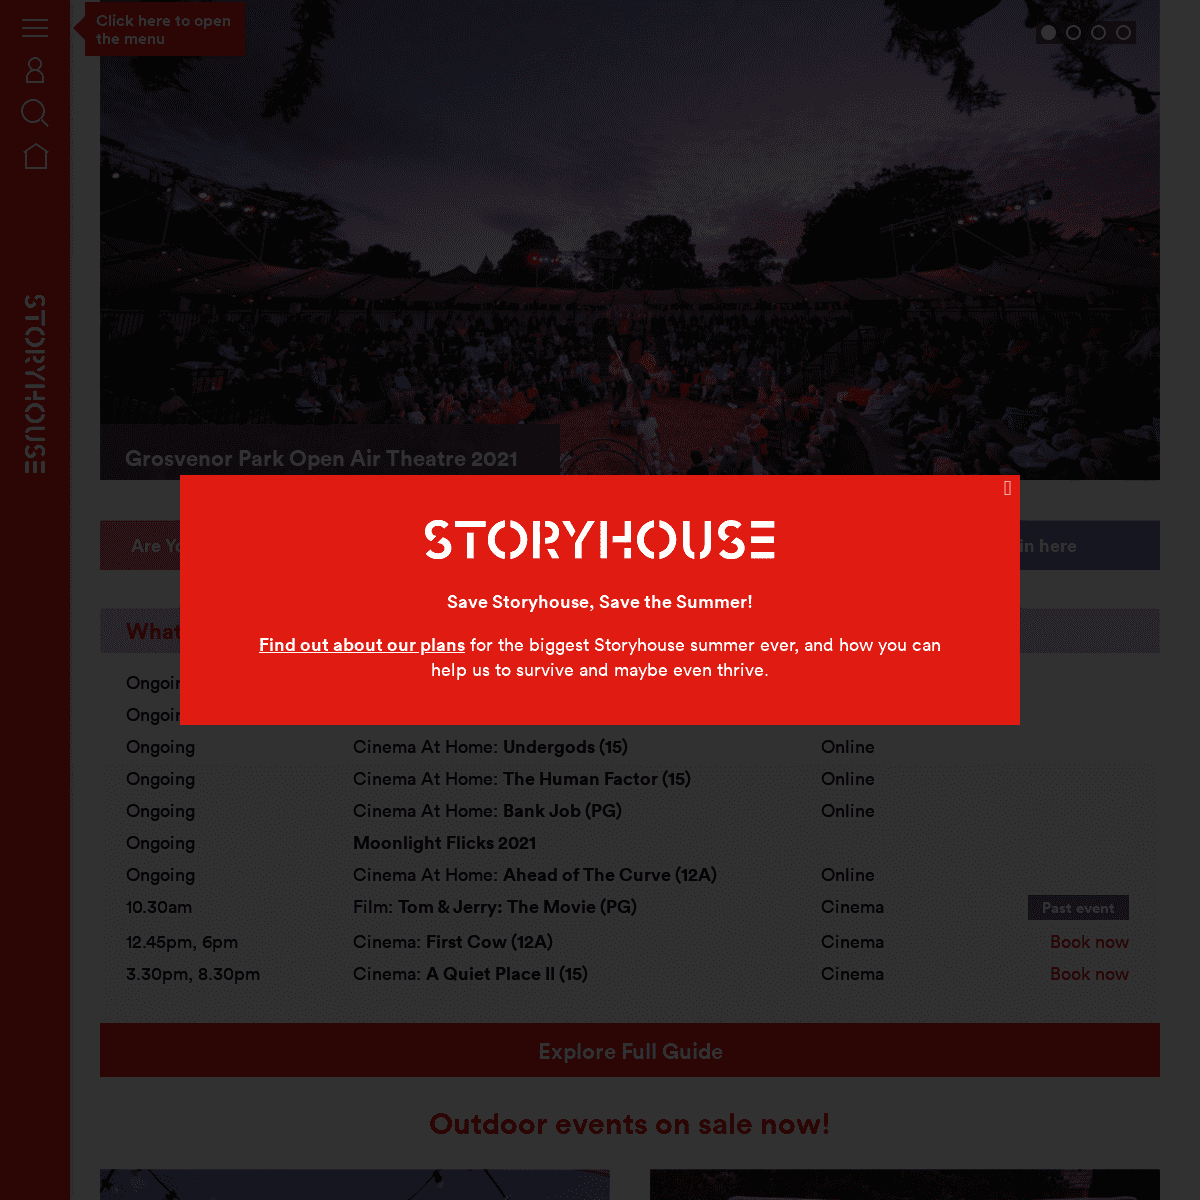 A complete backup of https://storyhouse.com